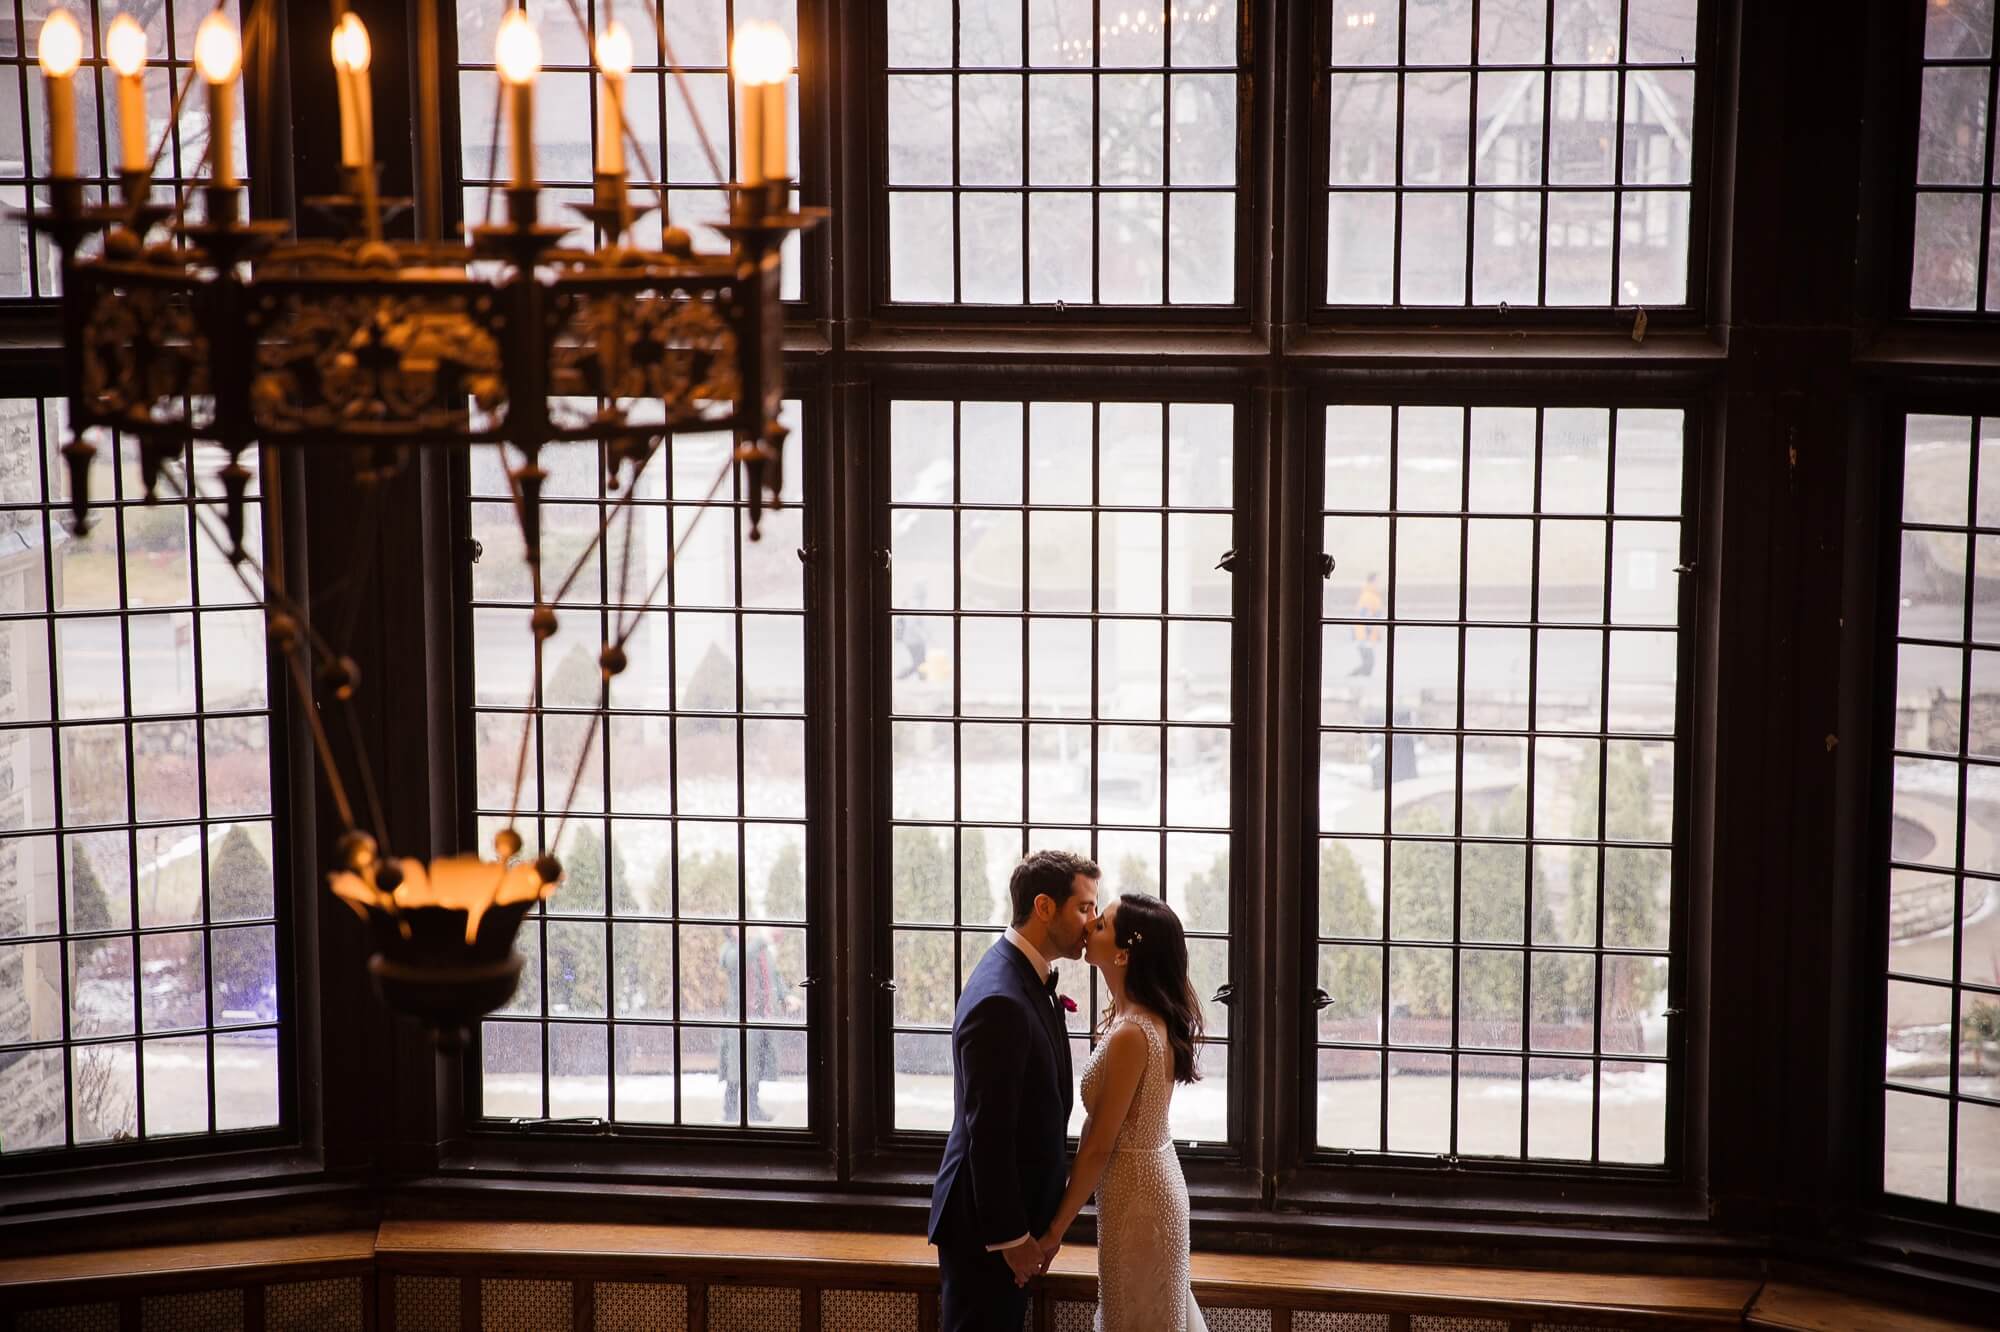 Dramatic Portrait of the Bride and Groom in front of a large window, under a candle chandelier at Casa Loma in Toronto